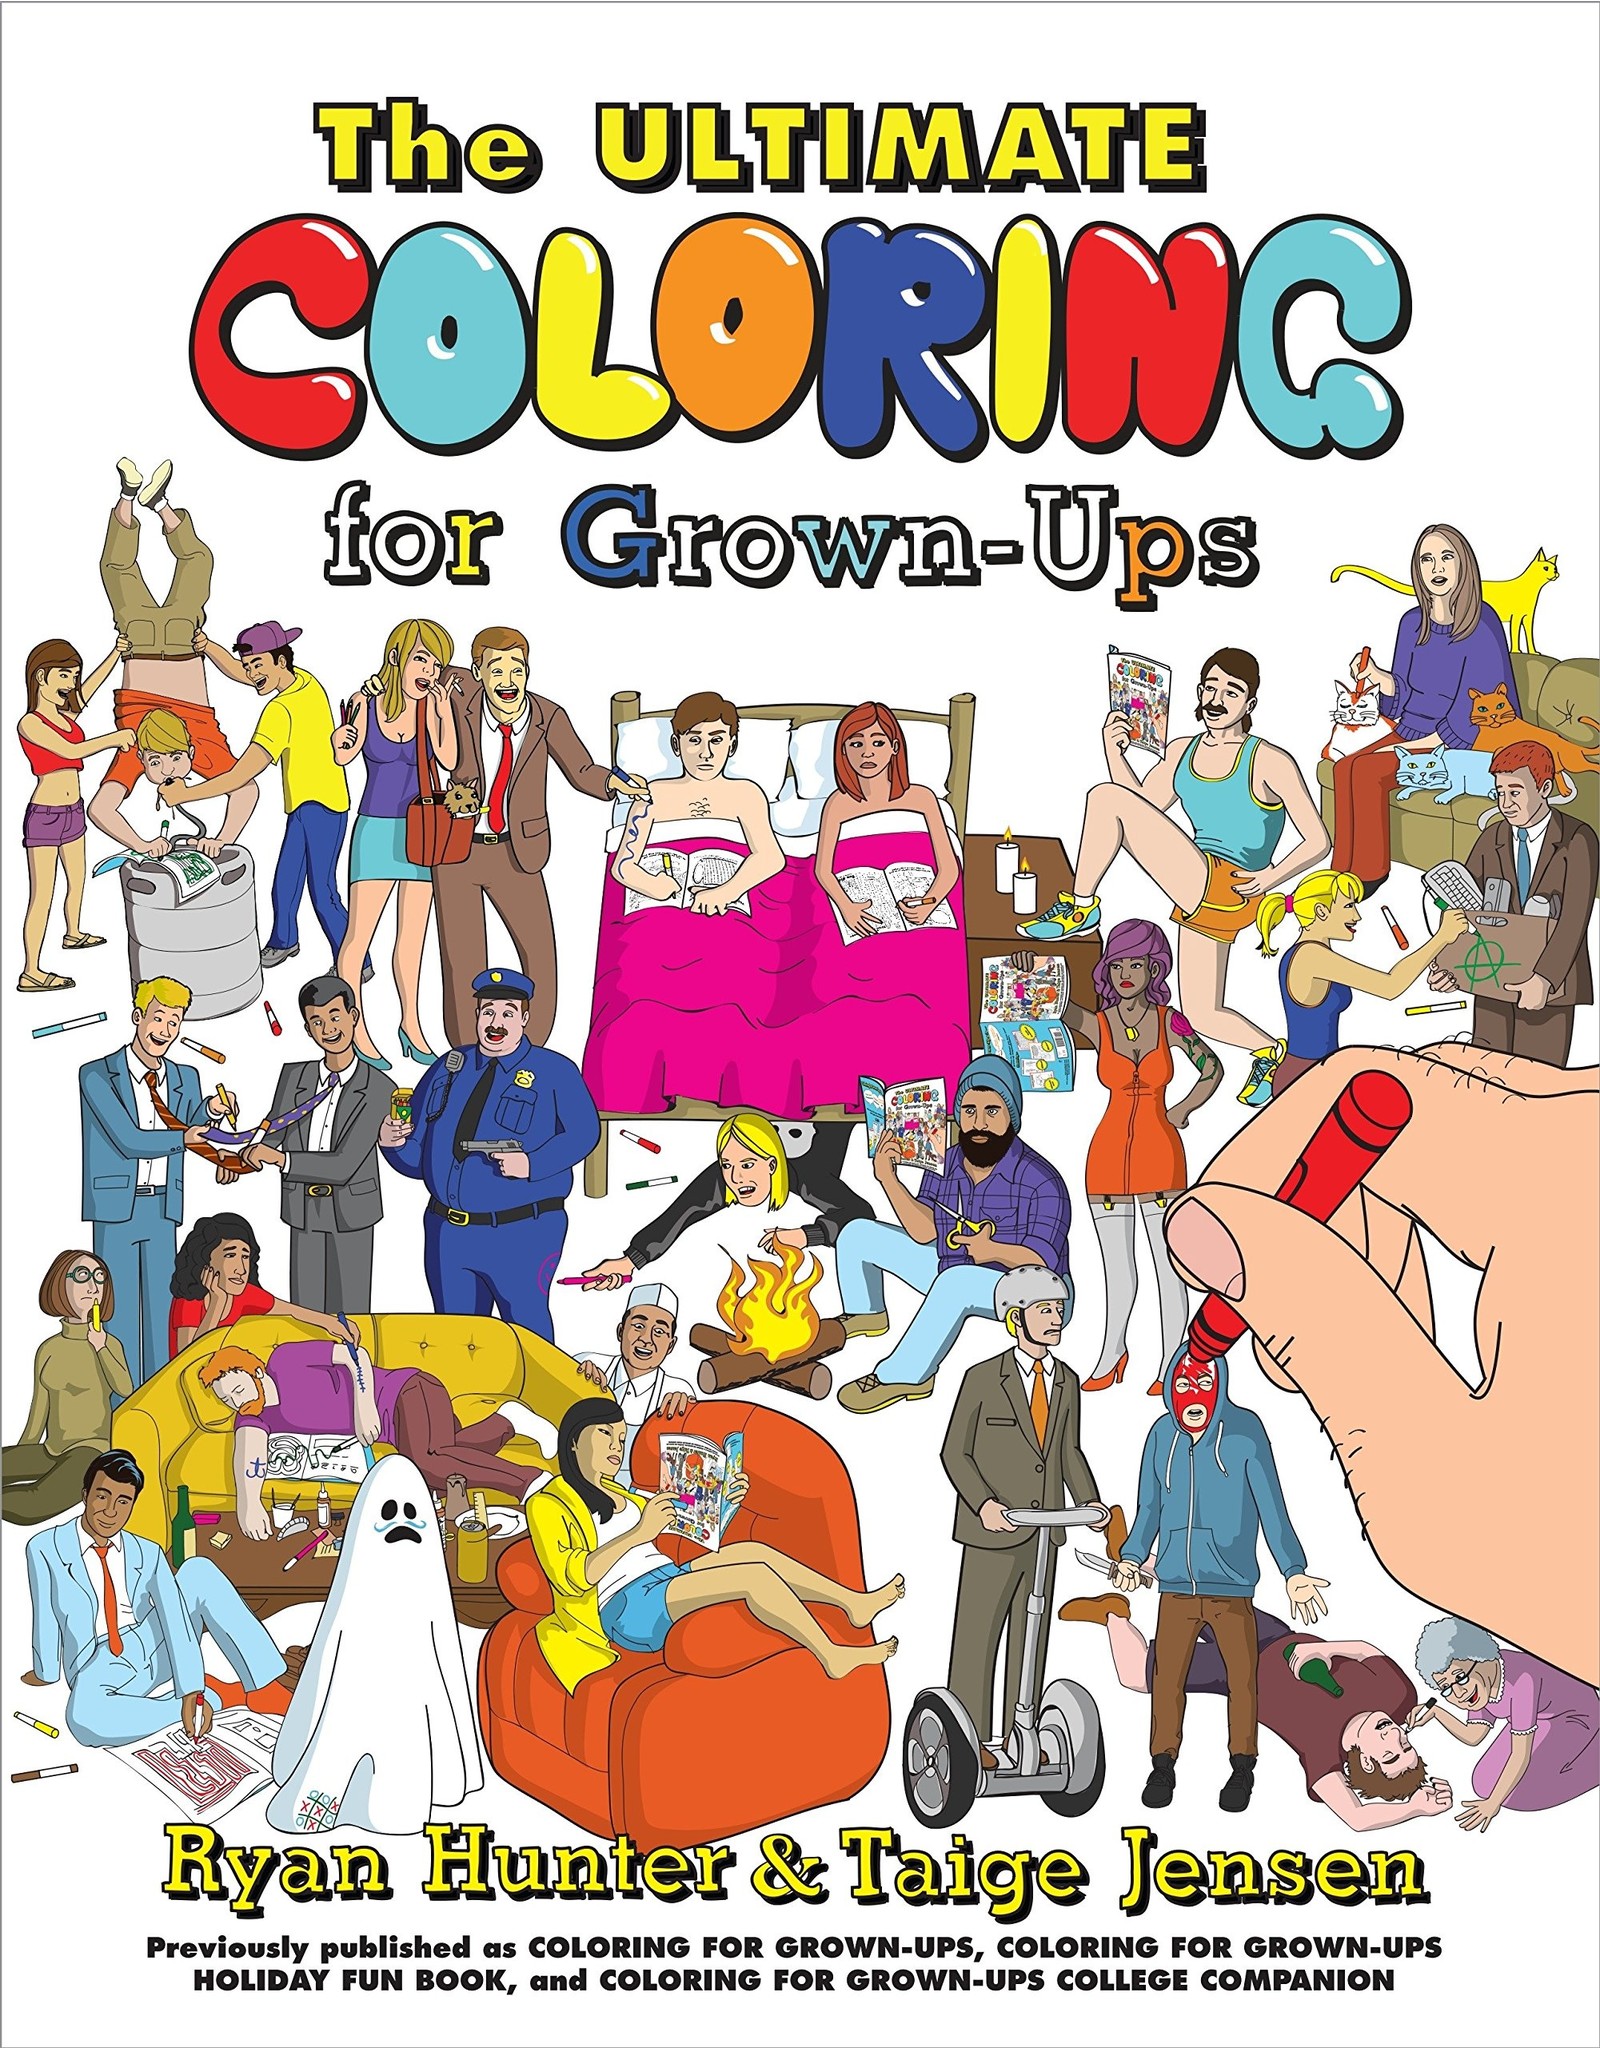 Literature The Ultimate Coloring for Grown-Ups